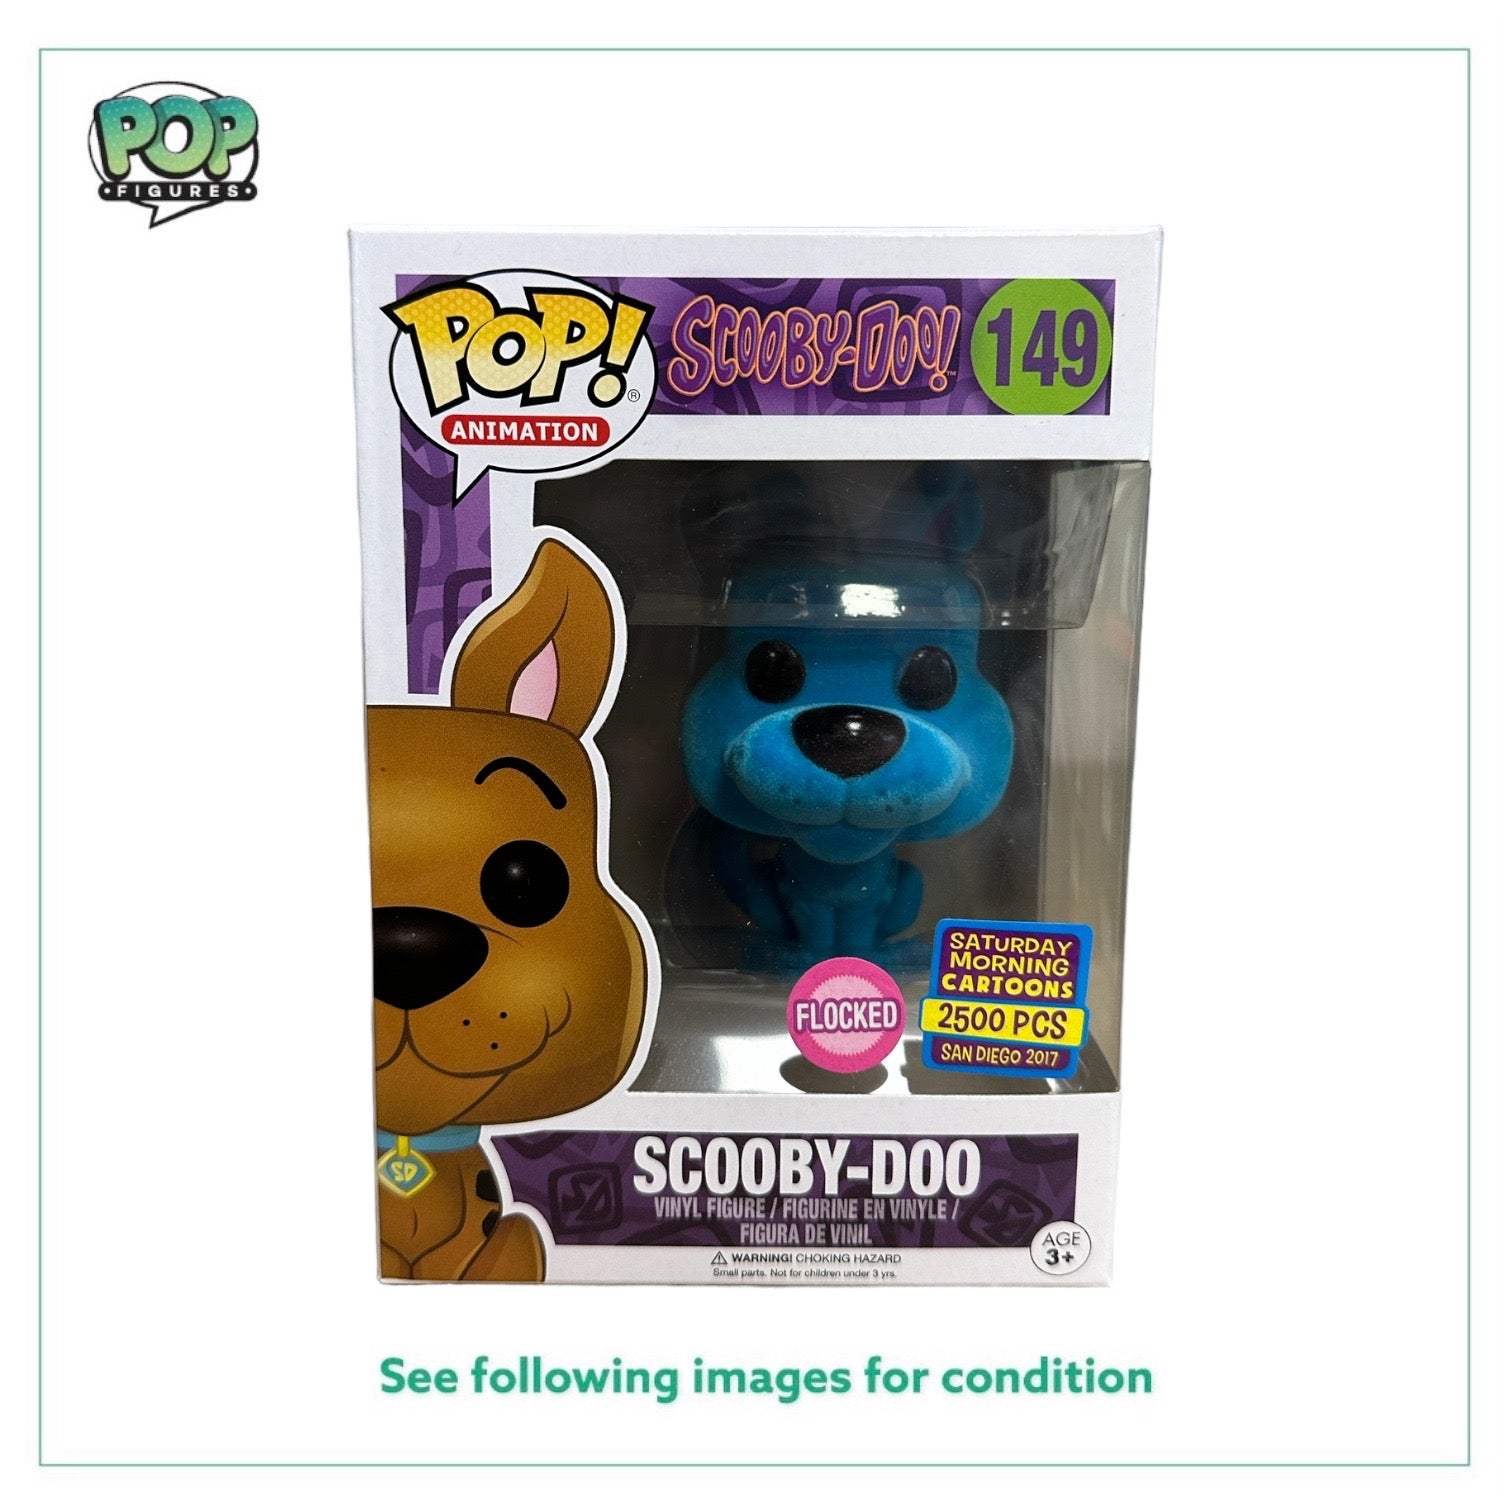 Scooby-Doo #149 (Blue Flocked) Funko Pop! - Scooby-Doo! - SDCC 2017 Saturday Morning Cartoons Exclusive LE2500 Pcs - Condition 9/10